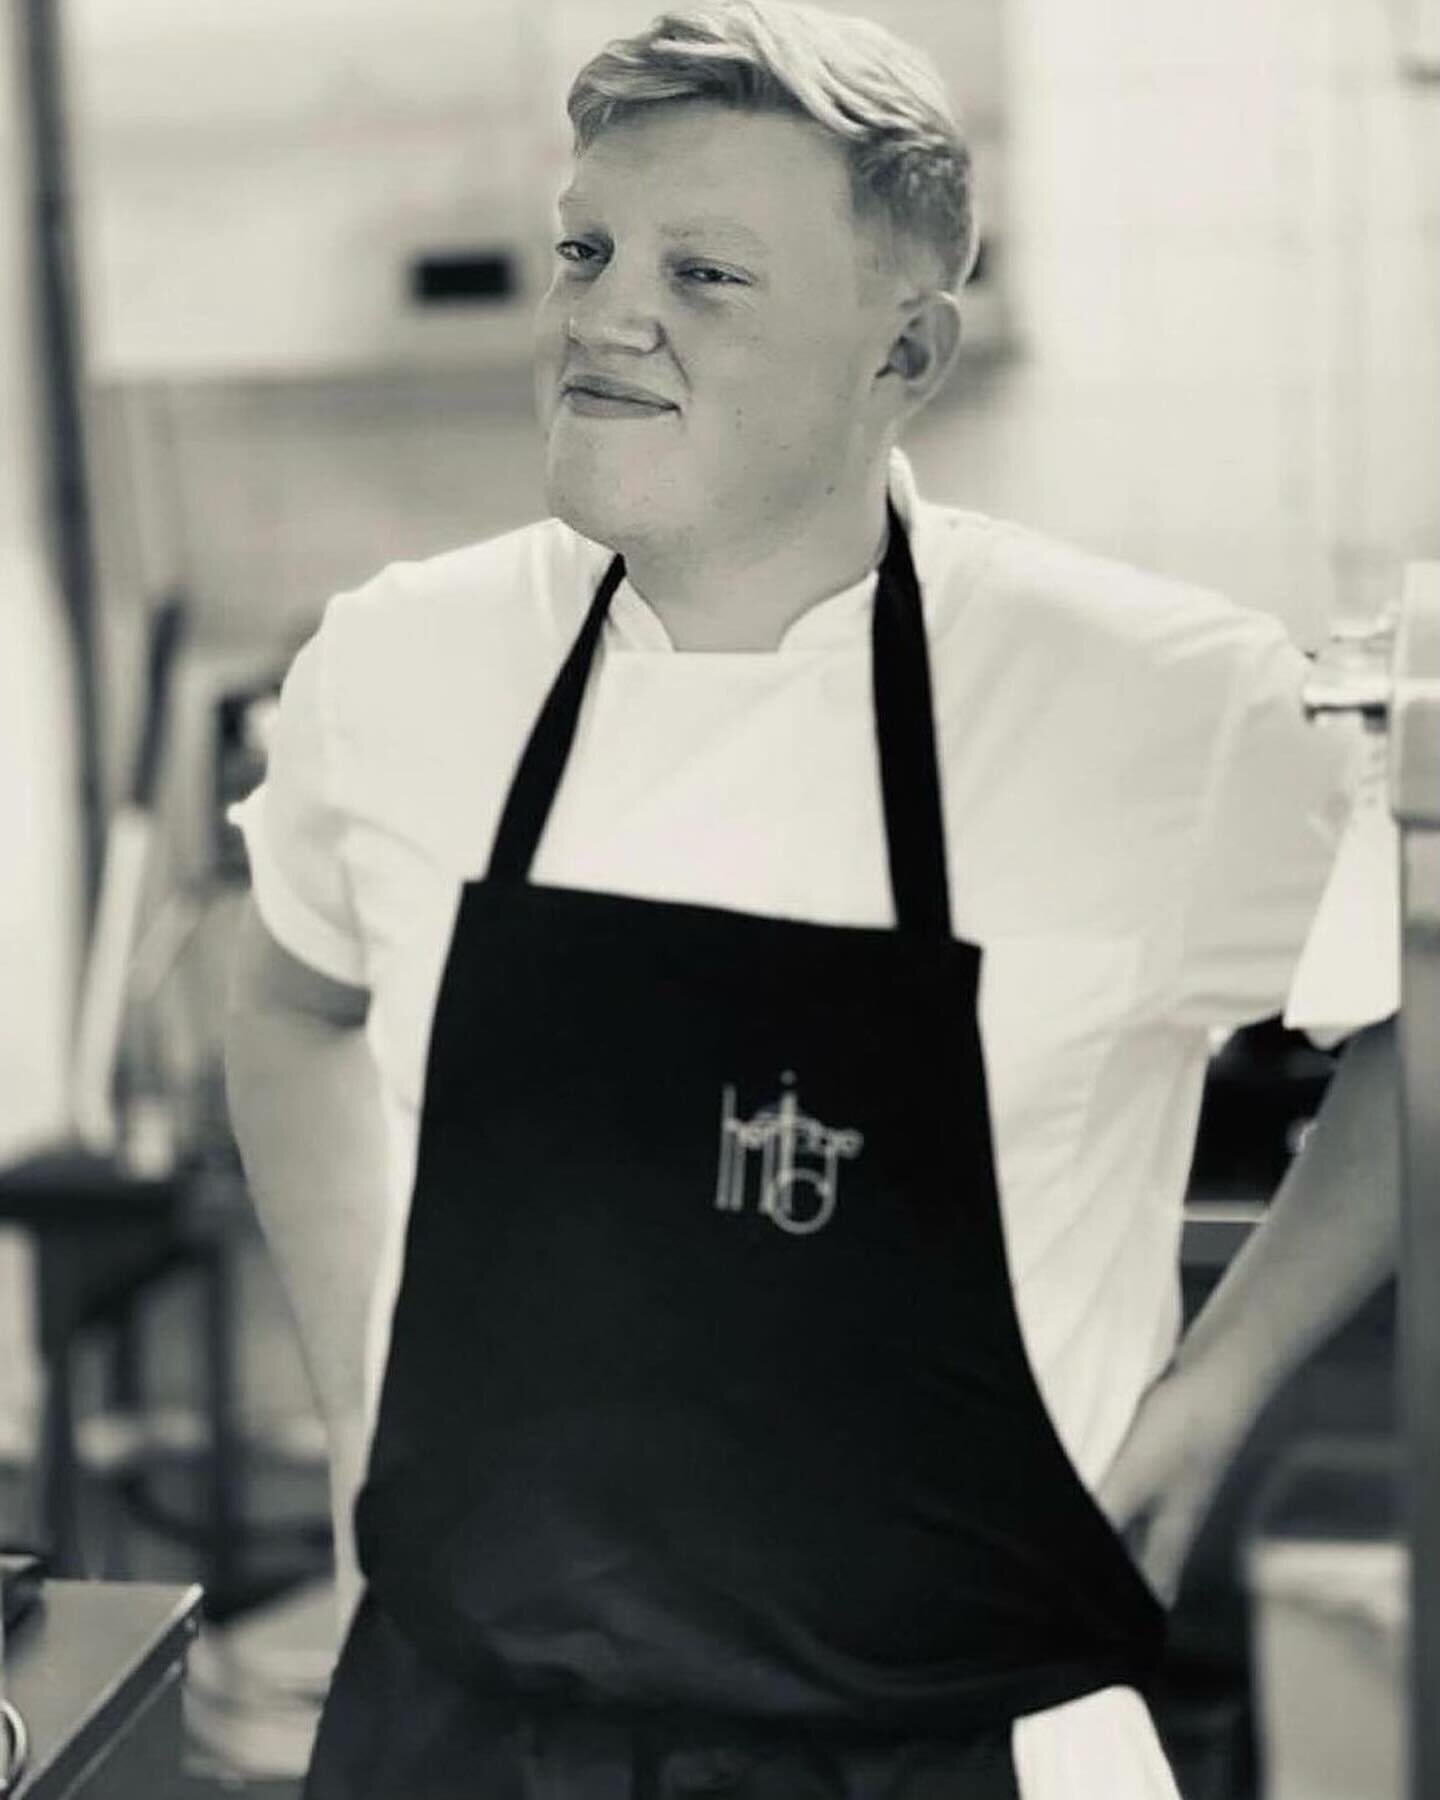 Exciting Boatyard news as we RELAUNCH this week 🌊 

Many of you will know we&rsquo;ve just bid farewell to our outstanding Head Chef Alfie, who&rsquo;s pushed Boatyard forwards enormously over the last two years and really helped make it the fresh f